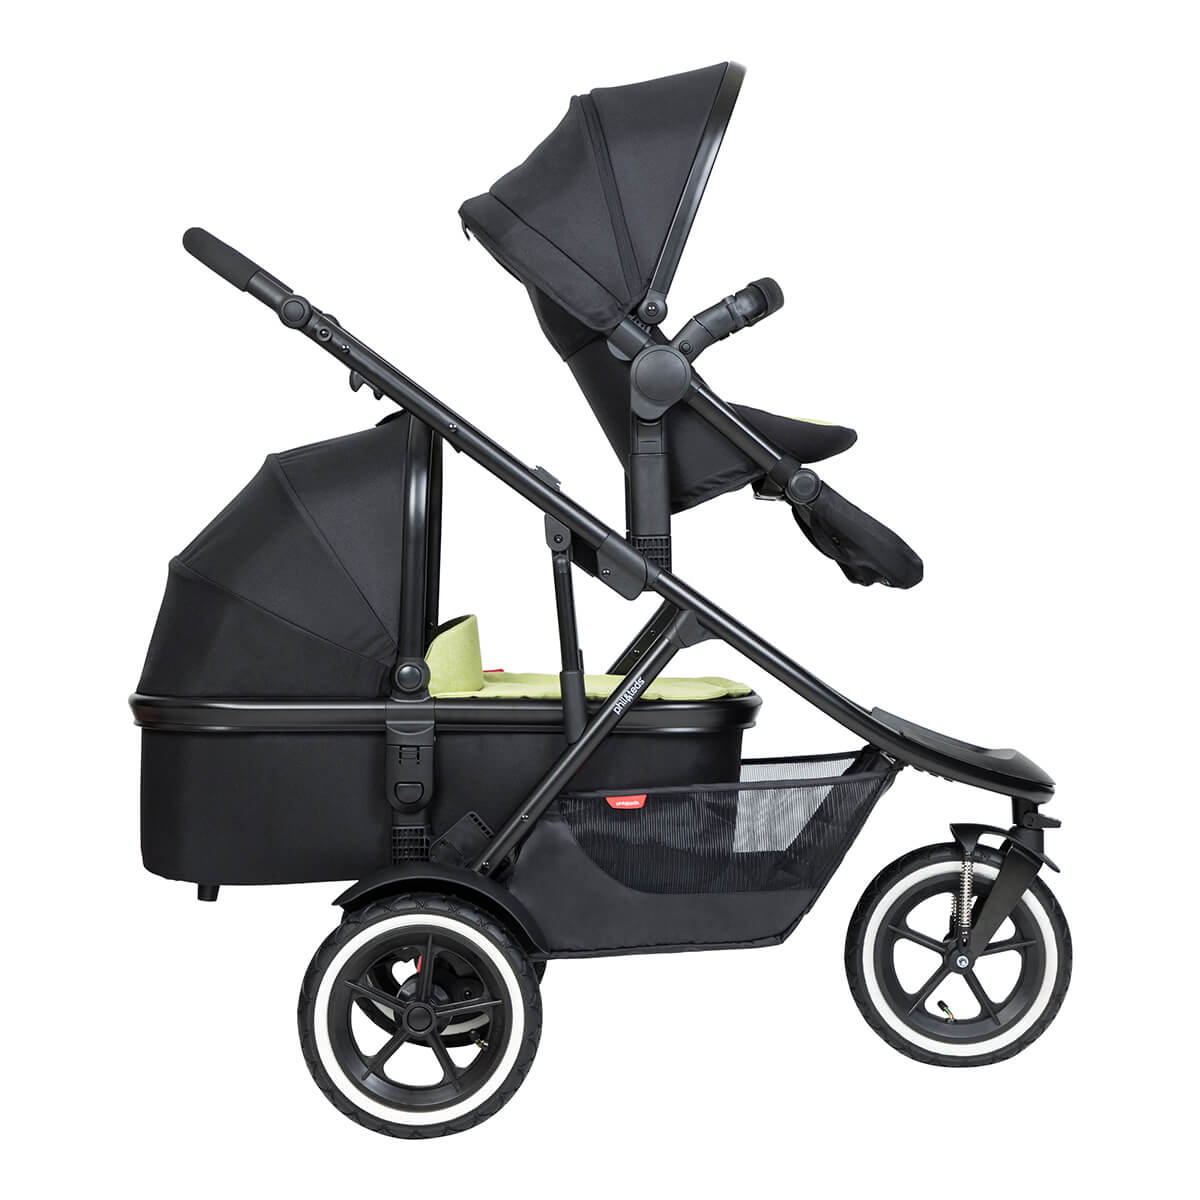 https://cdn.accentuate.io/4509528653912/19272668282968/philteds-sport-buggy-with-double-kit-extended-clip-and-snug-carrycot-side-view-v1626484552796.jpg?1200x1200